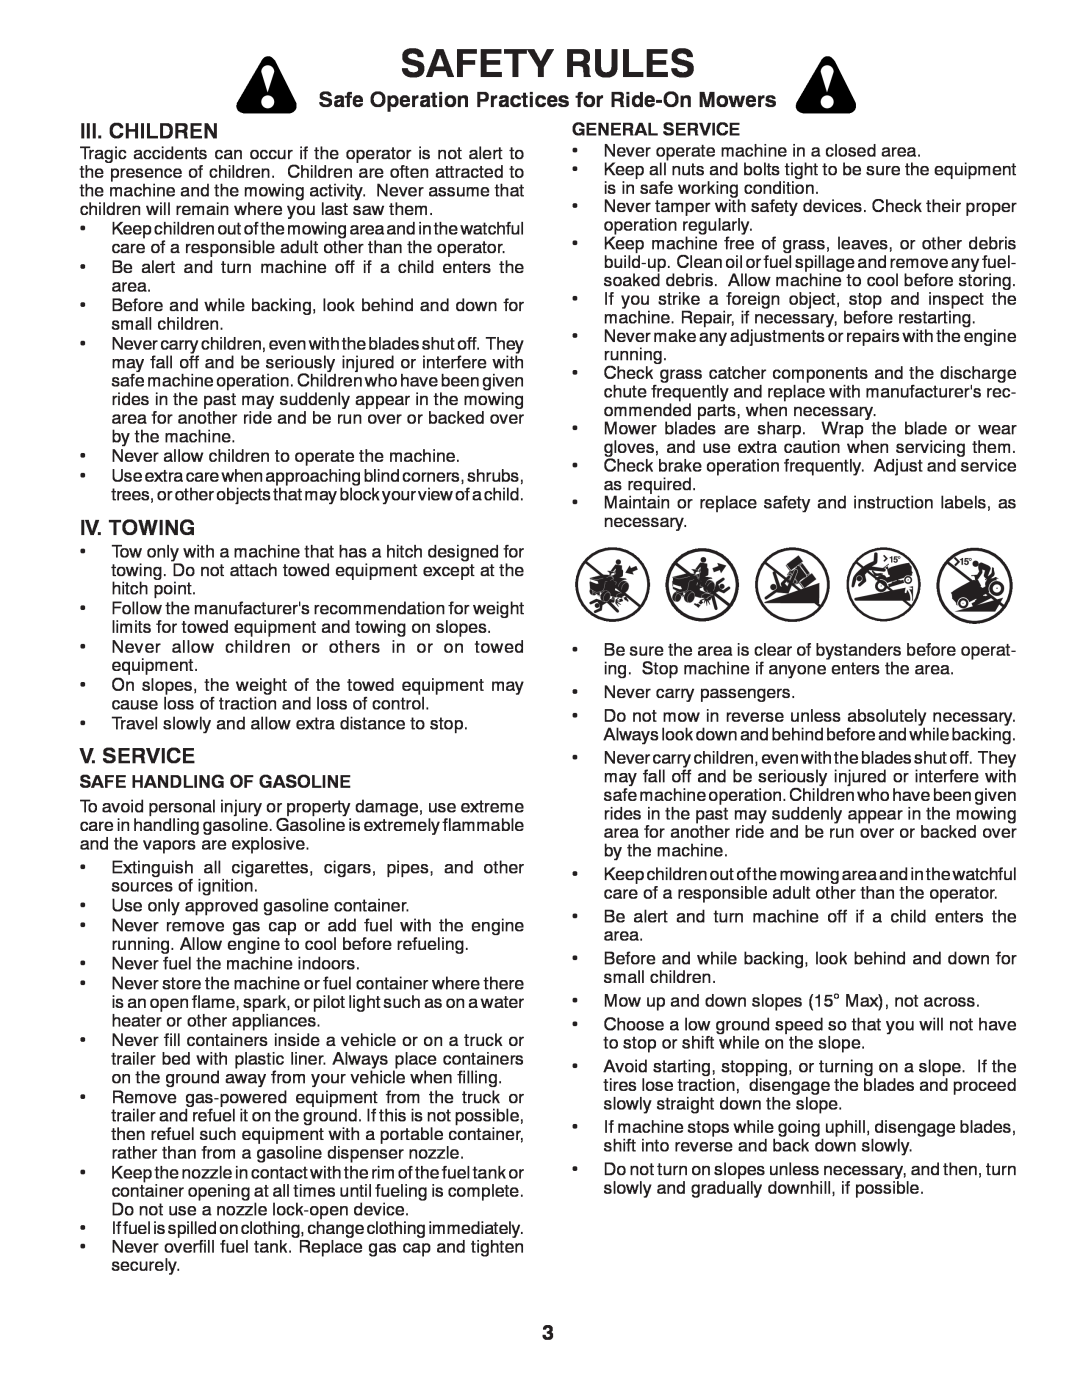 McCulloch M12530 manual Iii. Children, Iv. Towing, V. Service, Safety Rules, Safe Operation Practices for Ride-OnMowers 